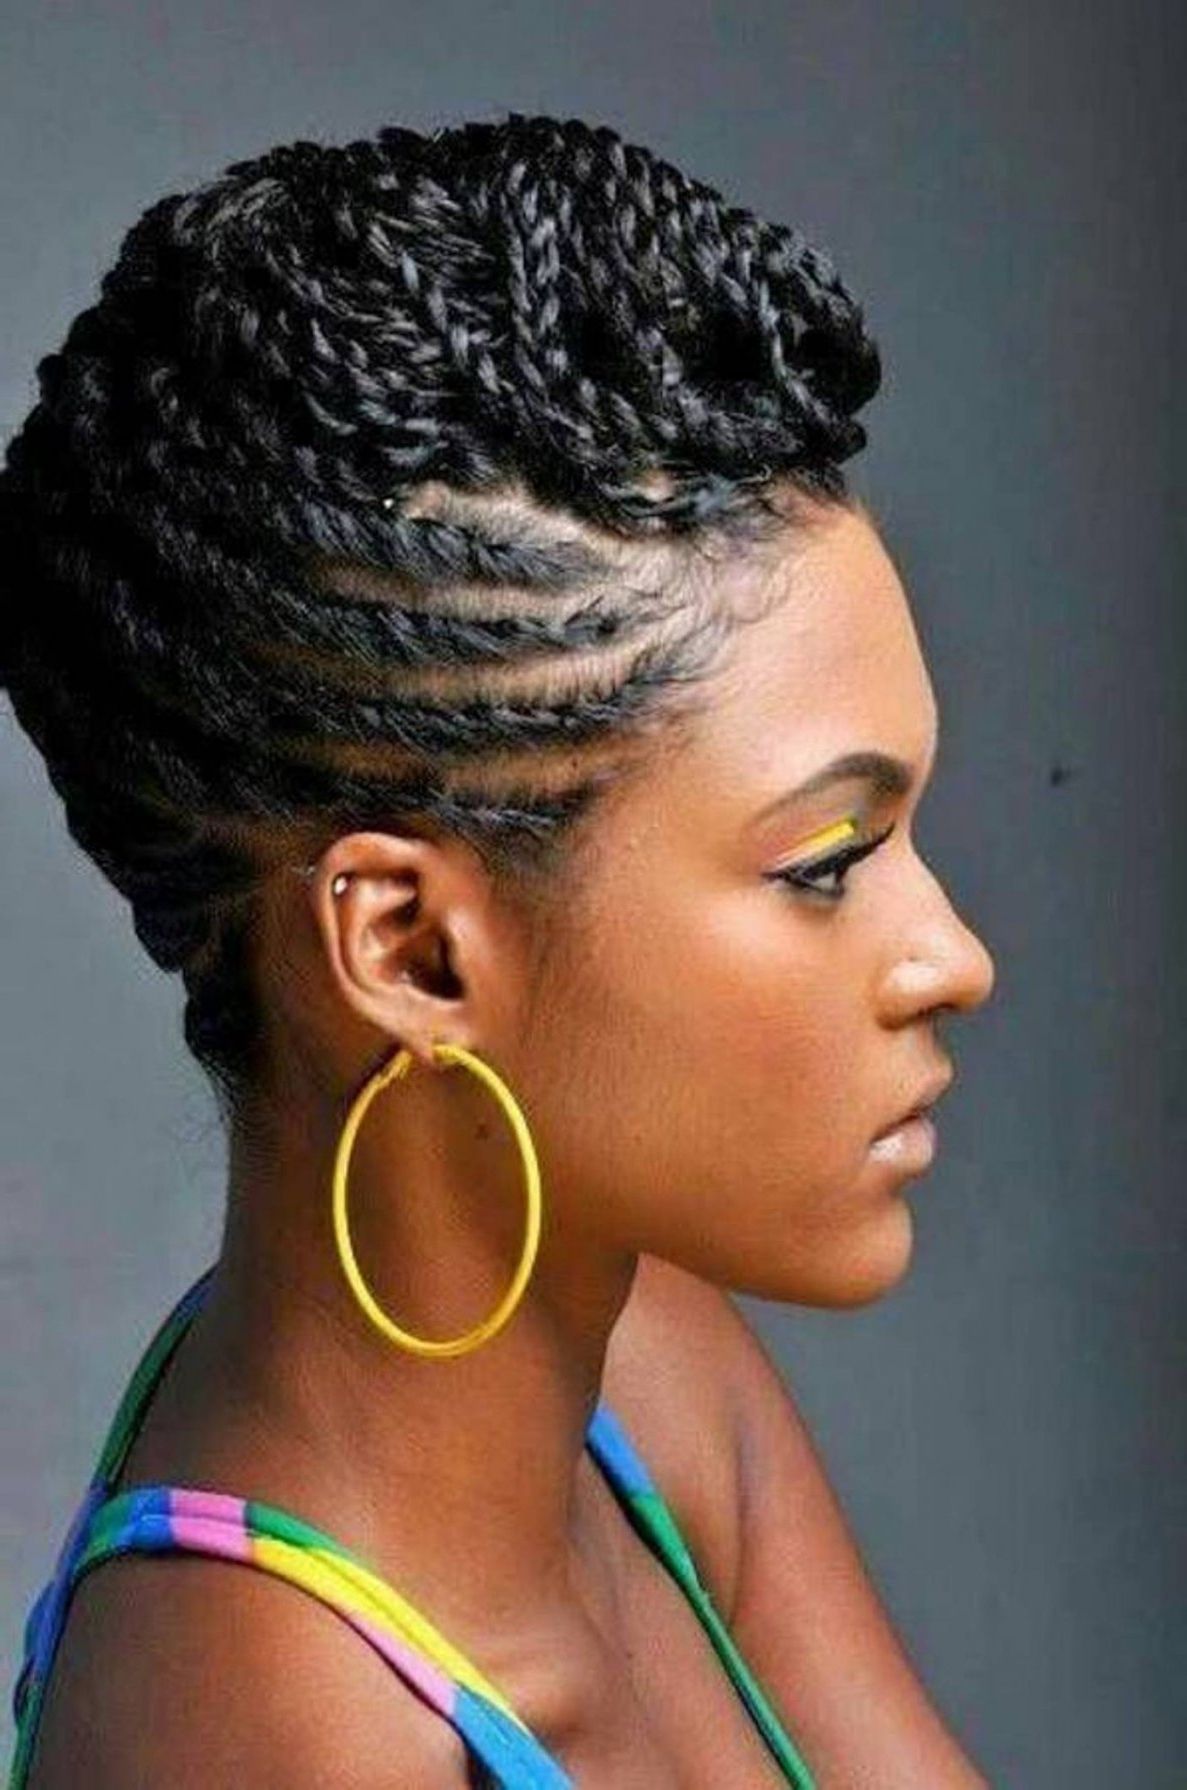 25 Updo Hairstyles For Black Women Throughout Short Braided Pertaining To Updo Hairstyles For Black Hair (View 3 of 15)